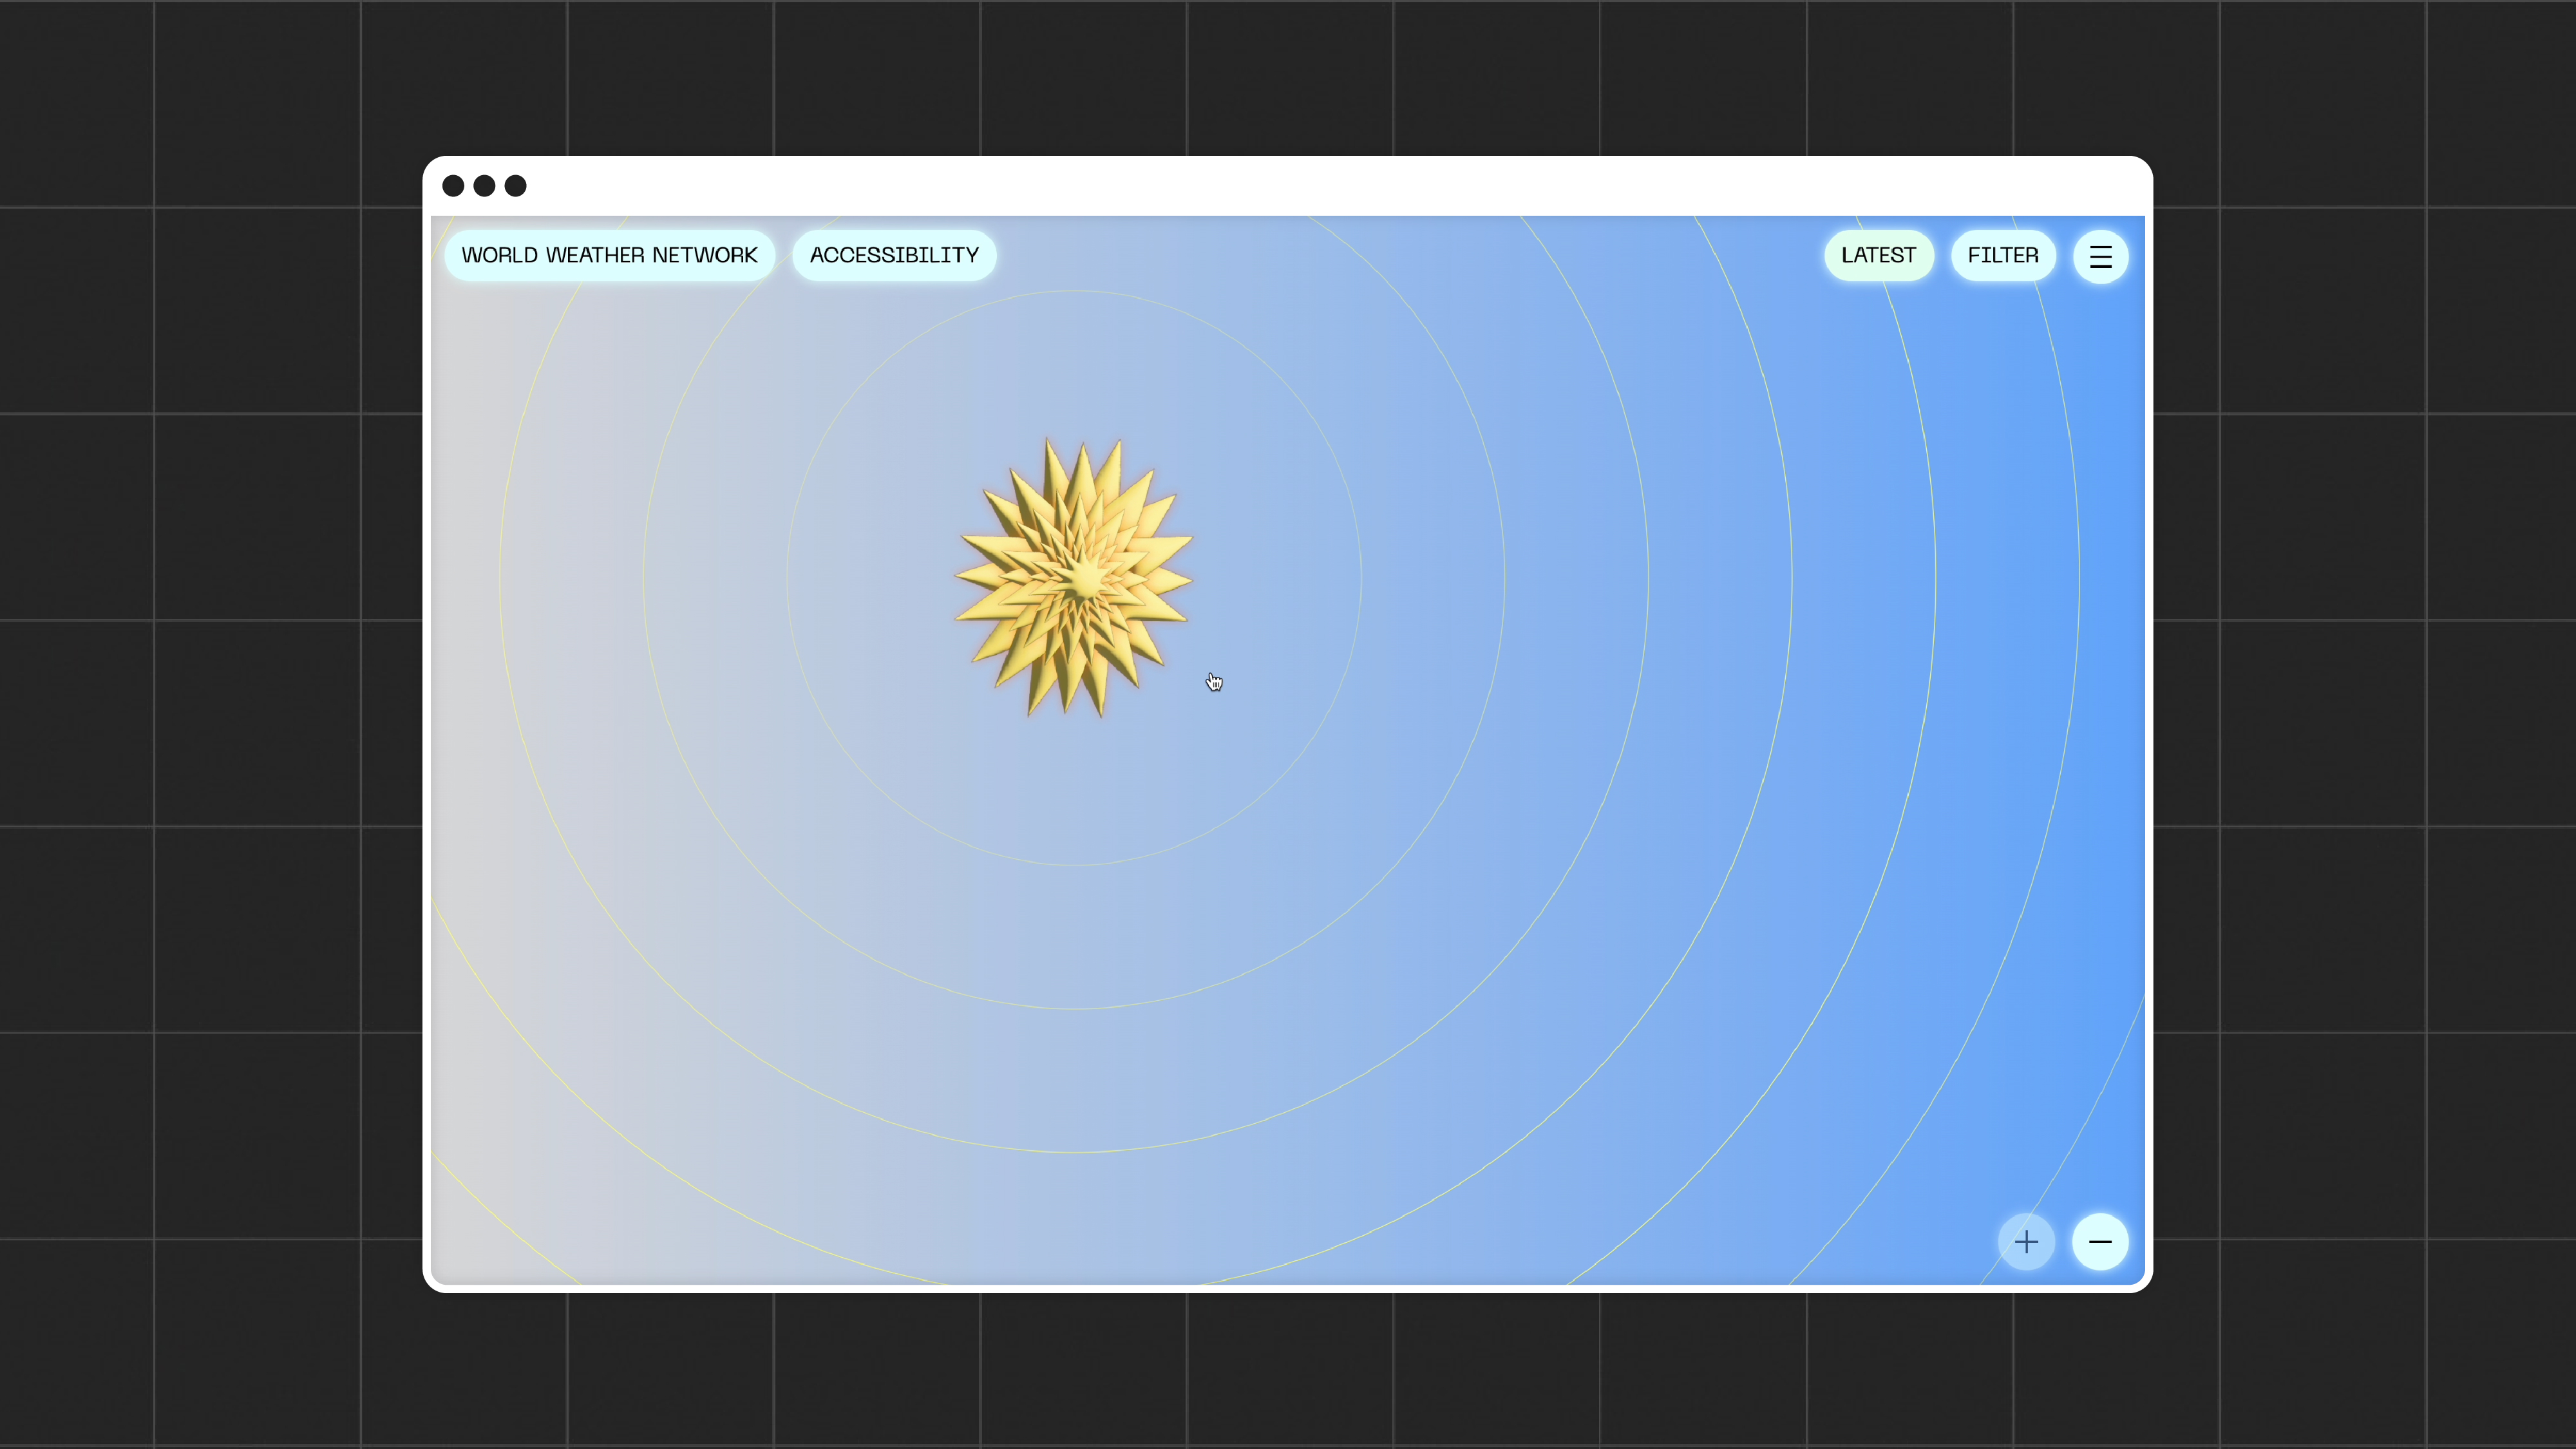 A desktop browser showing the world weather network website with a special event icon which is a sun